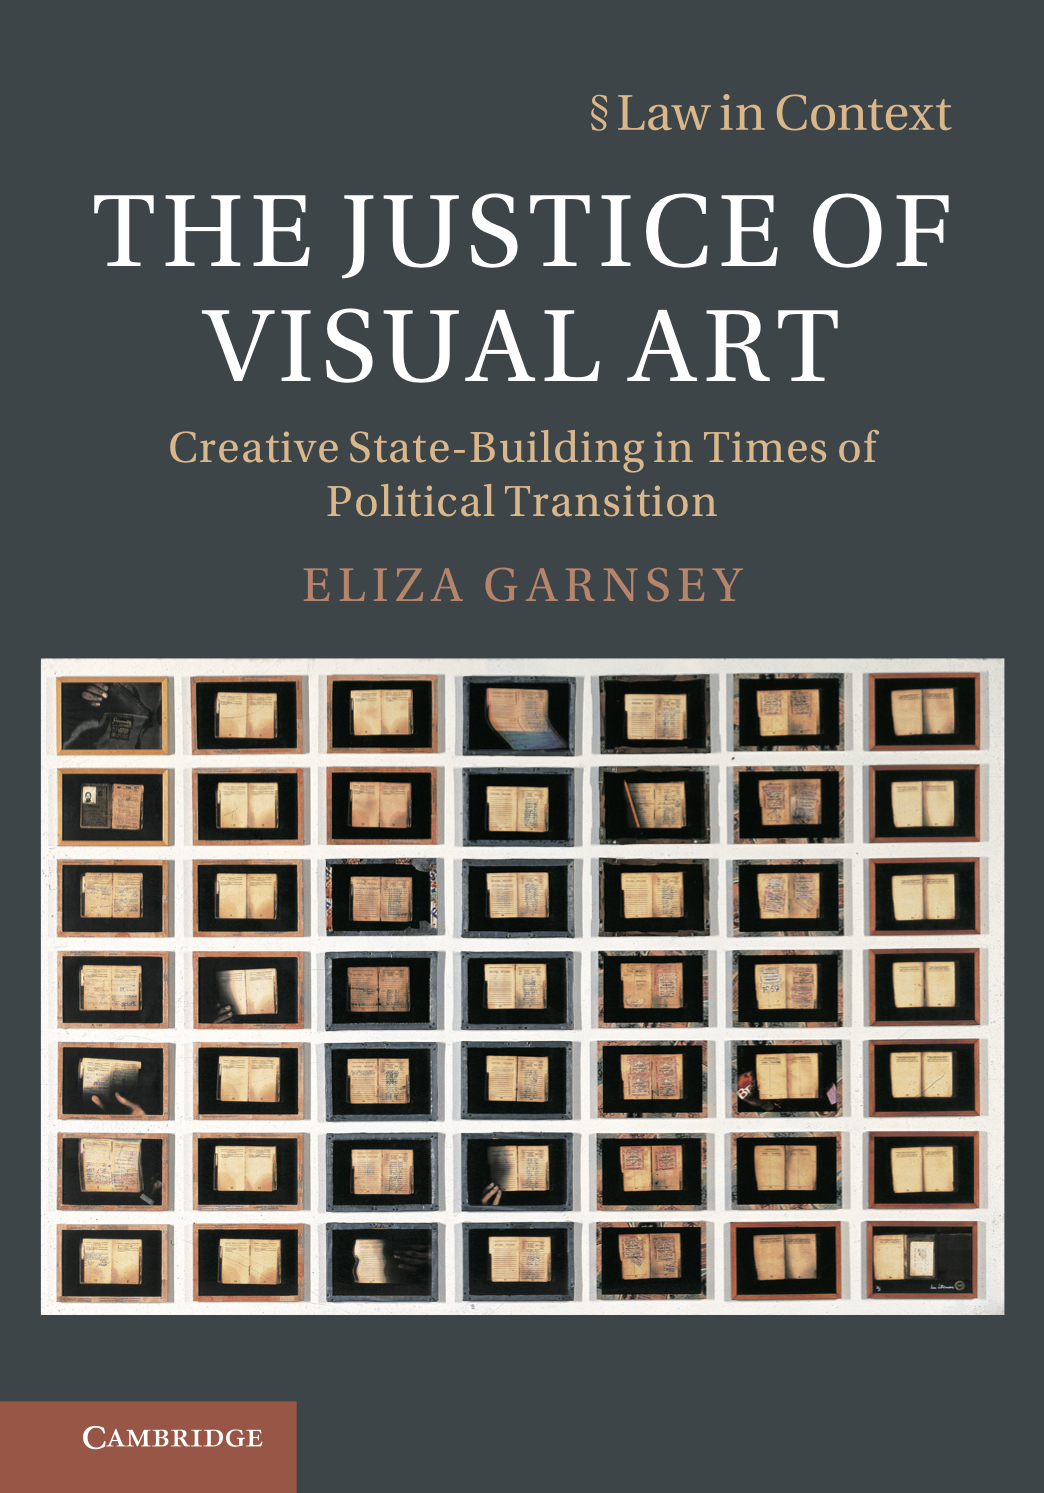 Cover of the book 'The Justice of Visual Art'.